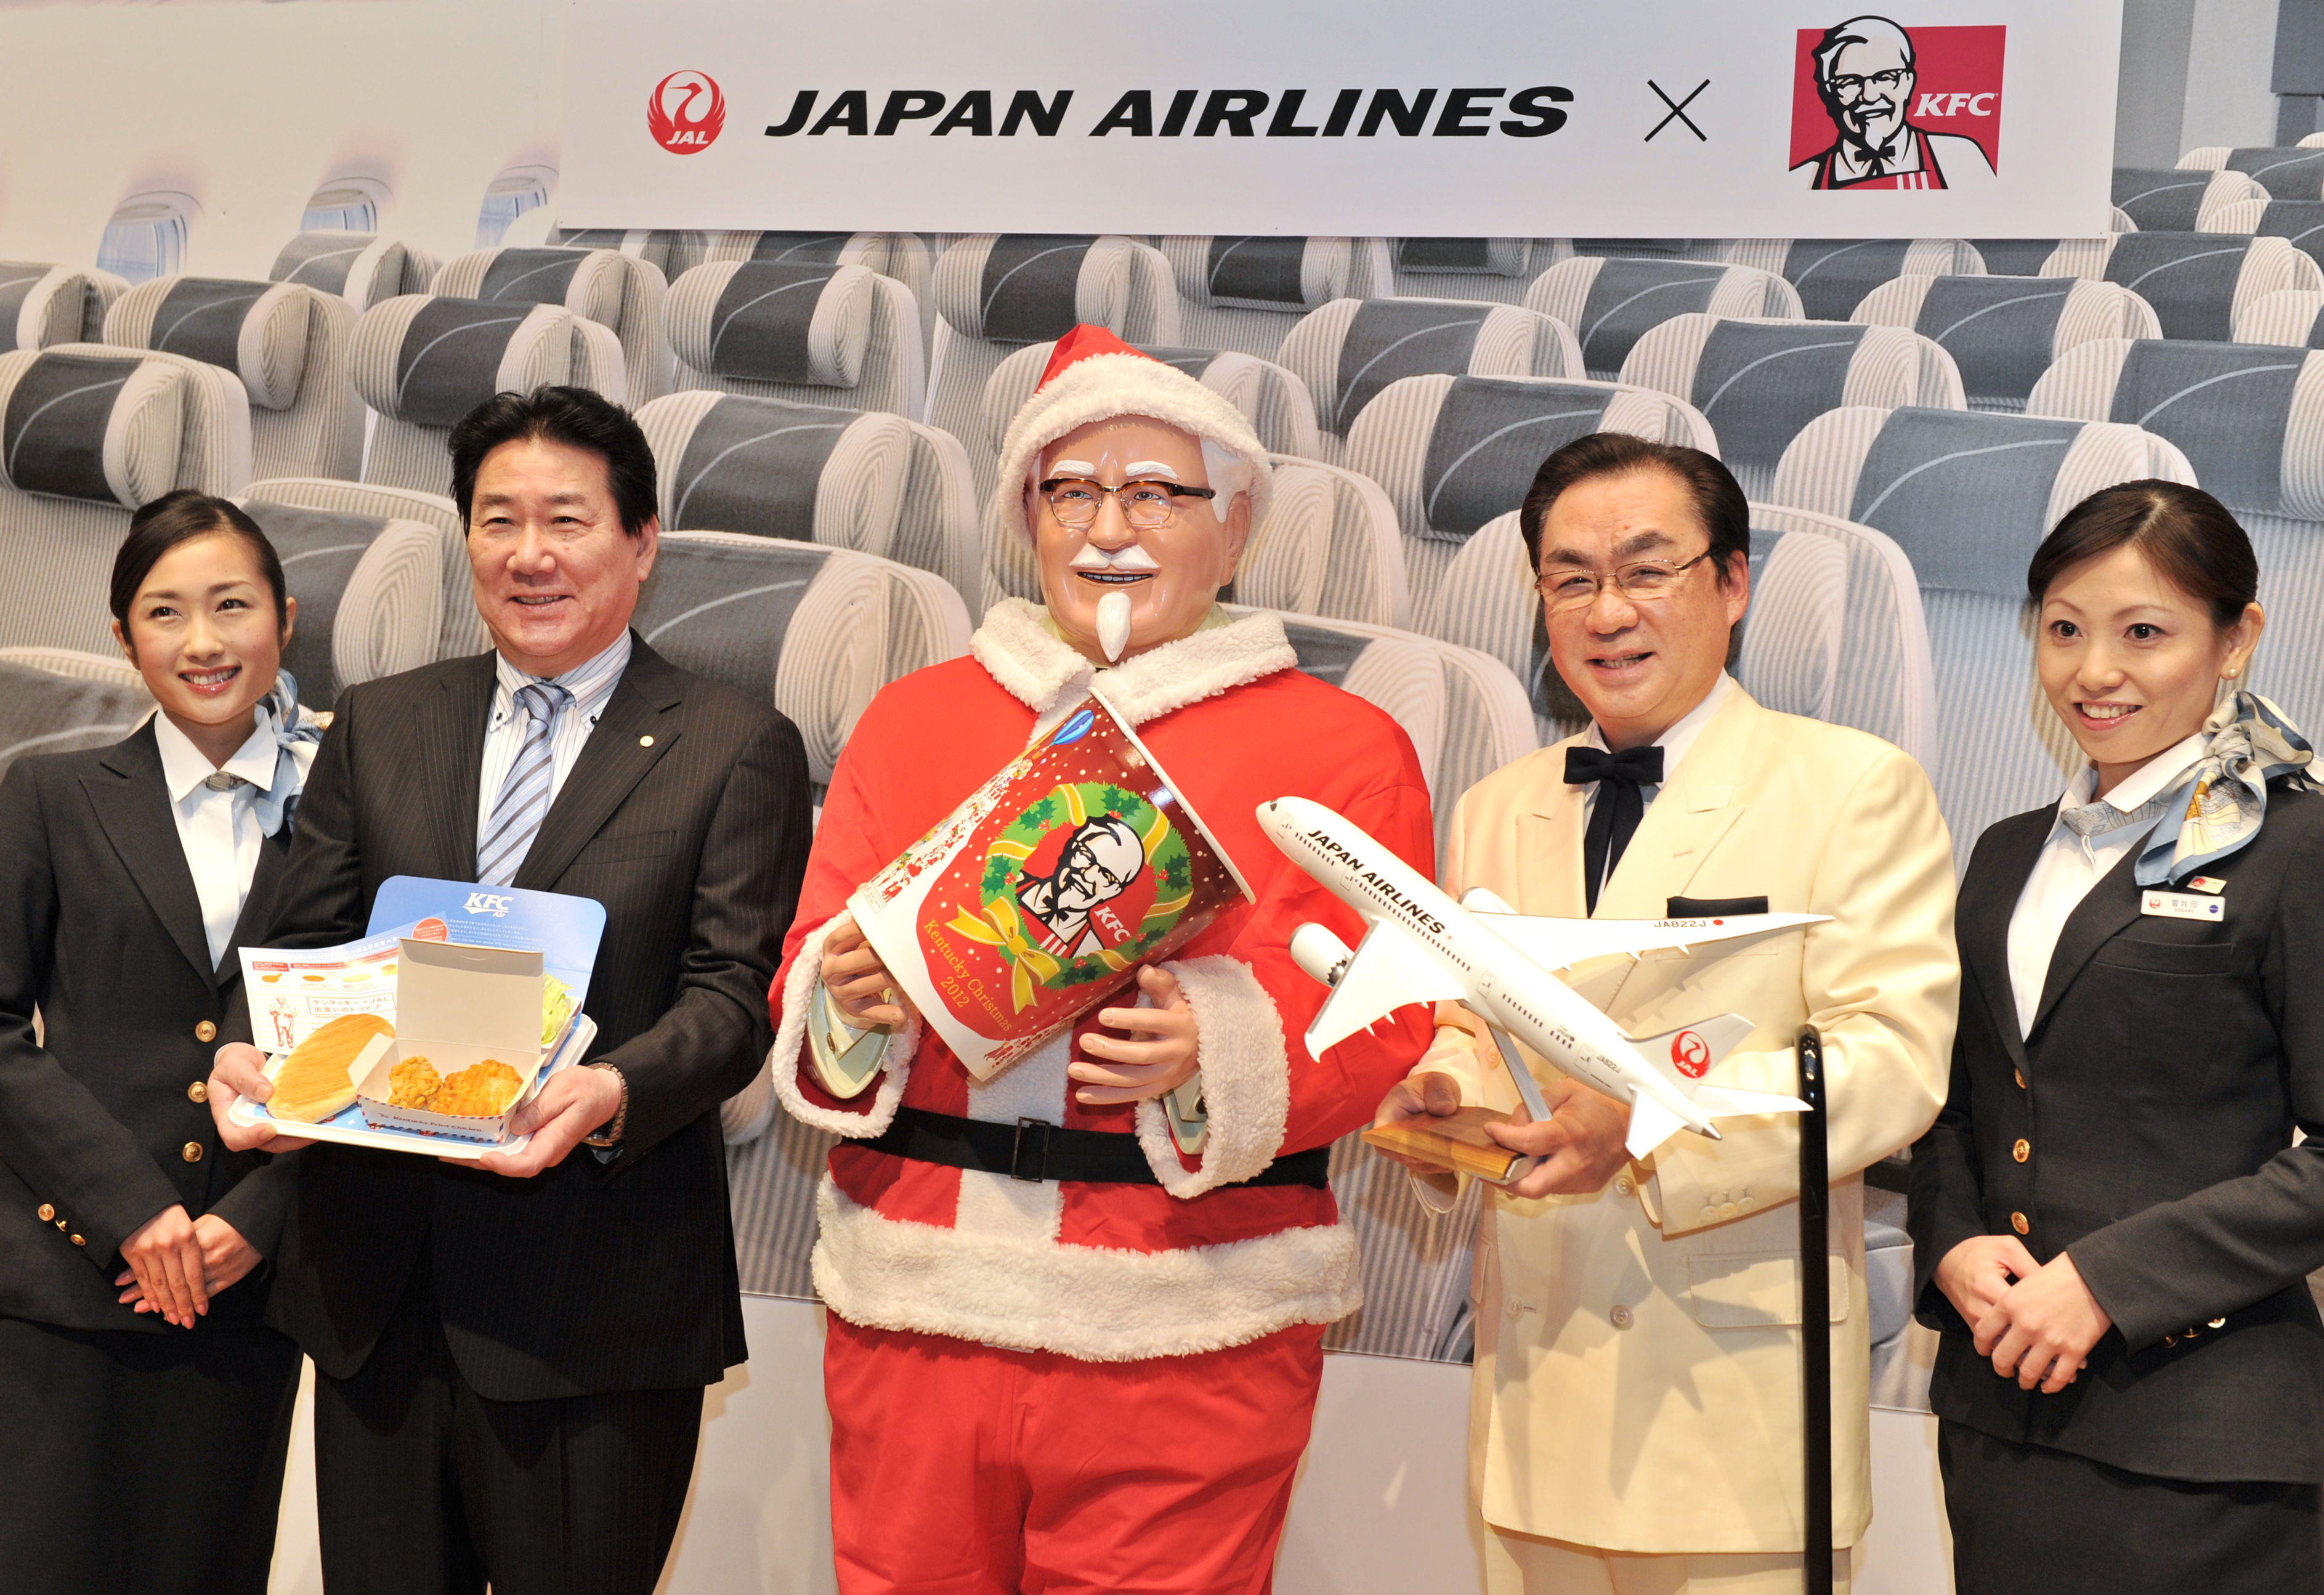 Japan Airlines President Yoshiharu Ueki (2nd L) and Masao Watanabe (2nd R), President of Kentucky Fried Chicken Japan pose with a statue of Colonel Sanders (C) wearing a Santa Claus costume during a photo session after a press conference to announce their new "AIR Kentucky Fried Chicken" in-flight fried chicken service, in Tokyo on November 28, 2012. (KAZUHIRO NOGI—AFP/Getty Images)